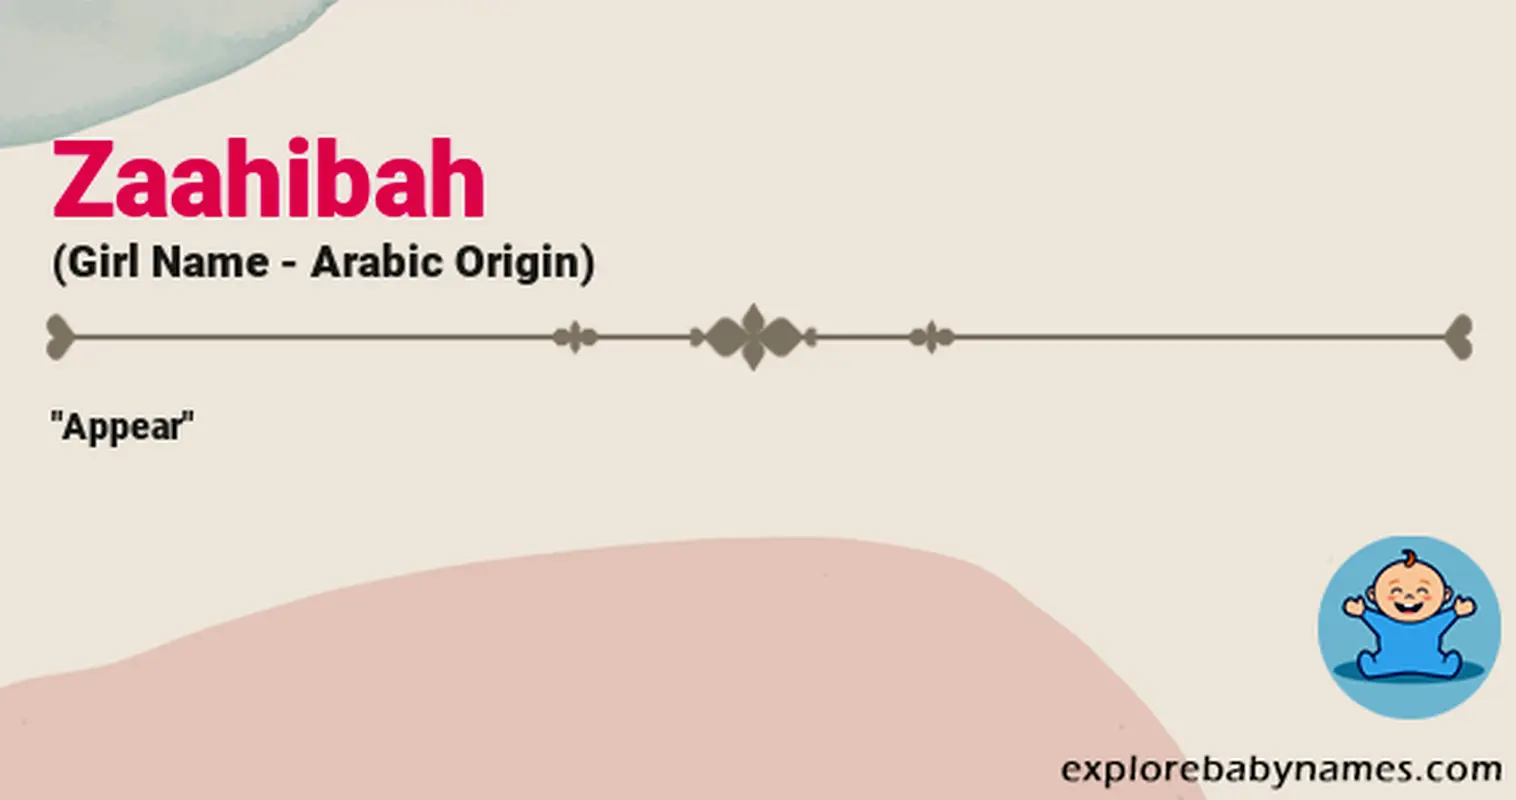 Meaning of Zaahibah